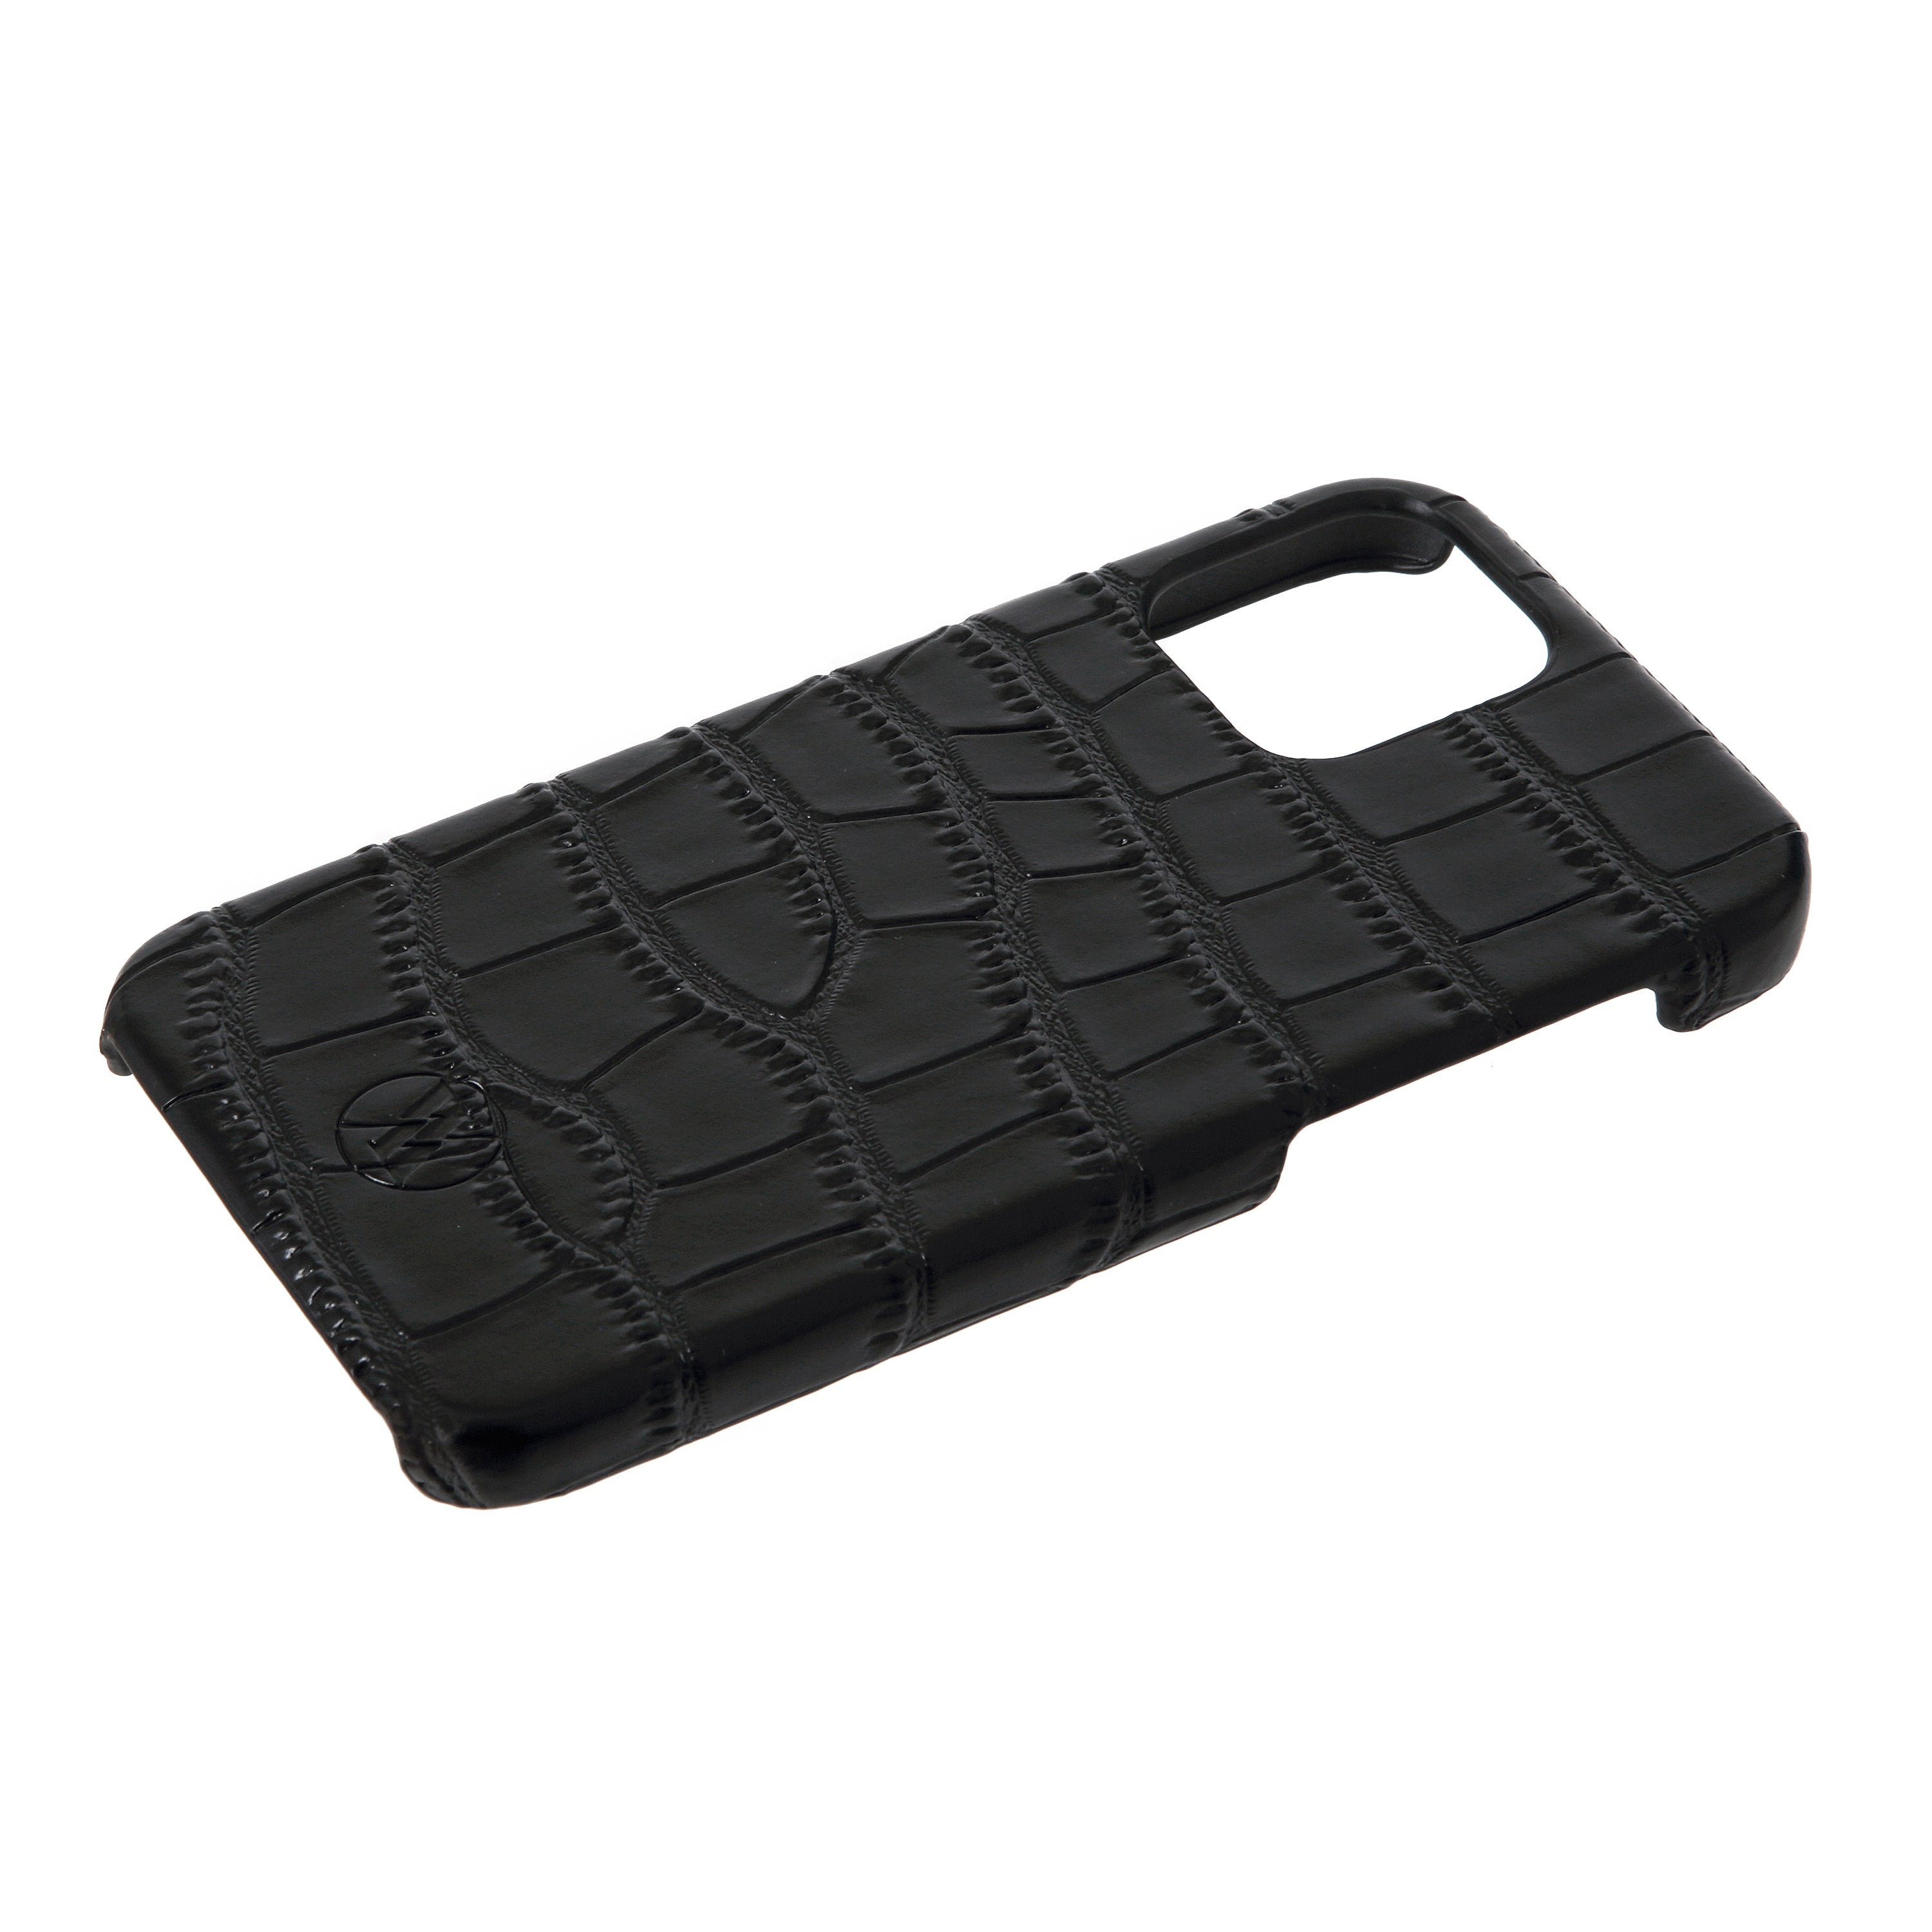 Black Croc Leather Phone Case Embossed Personalised for iPhone -   Singapore